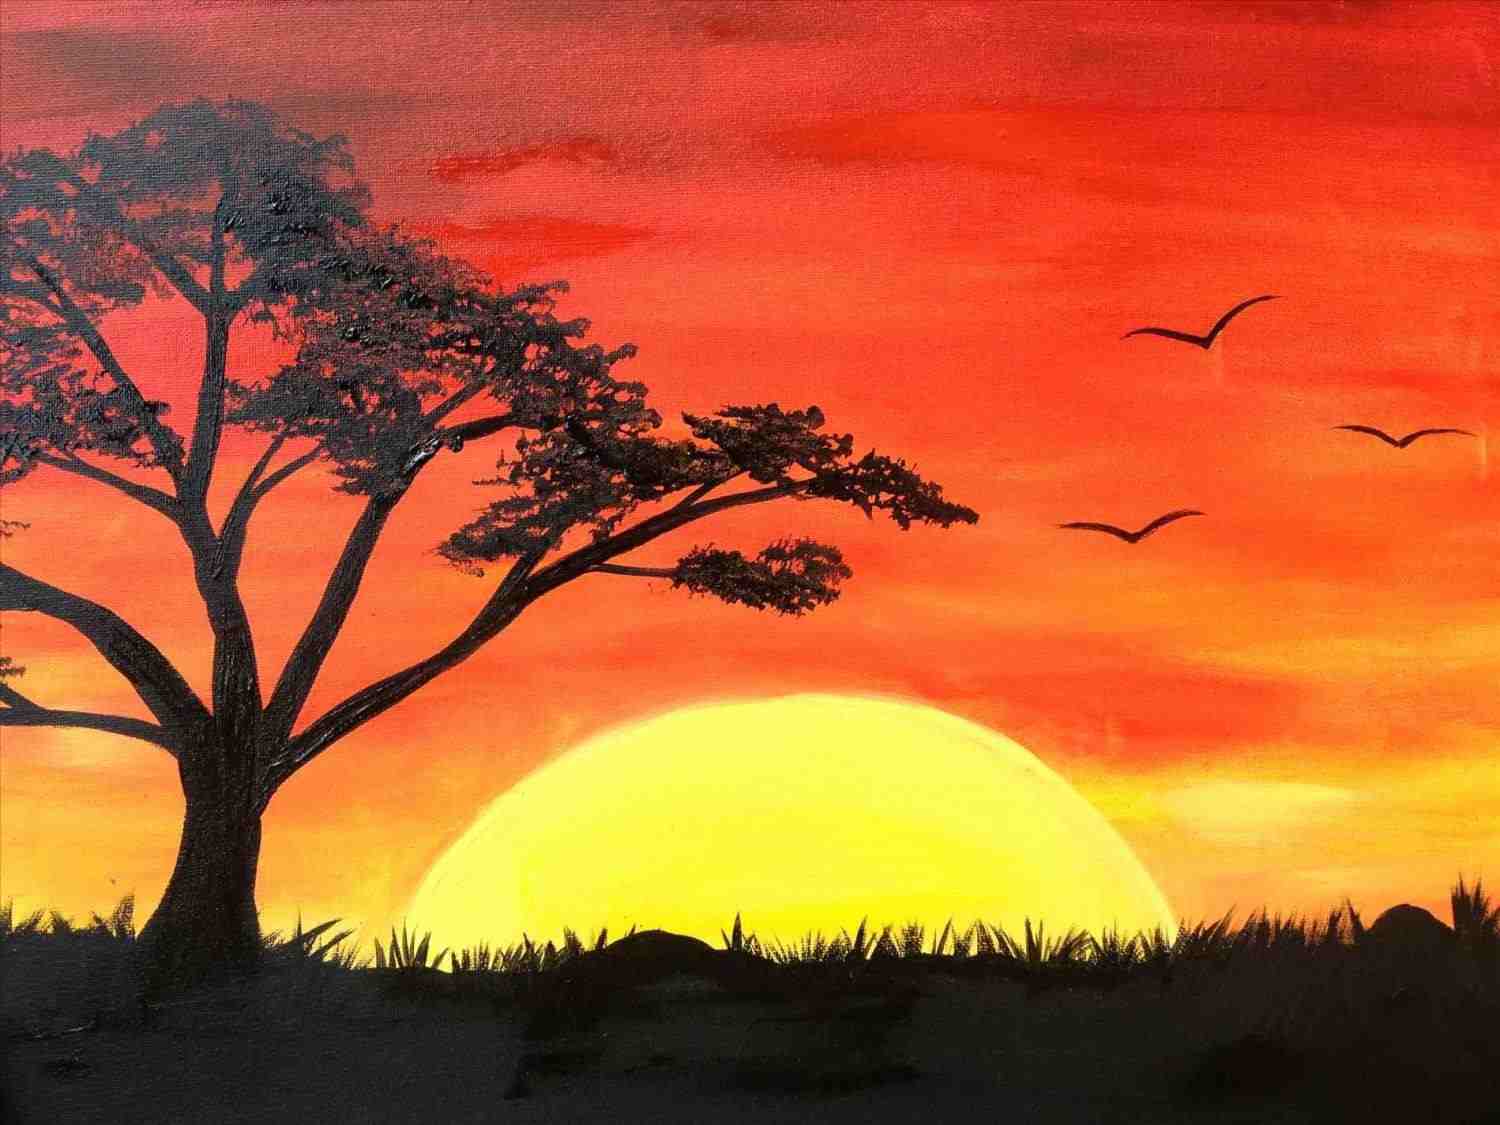 Watercolor Landscape Paintings For Beginners at PaintingValley.com